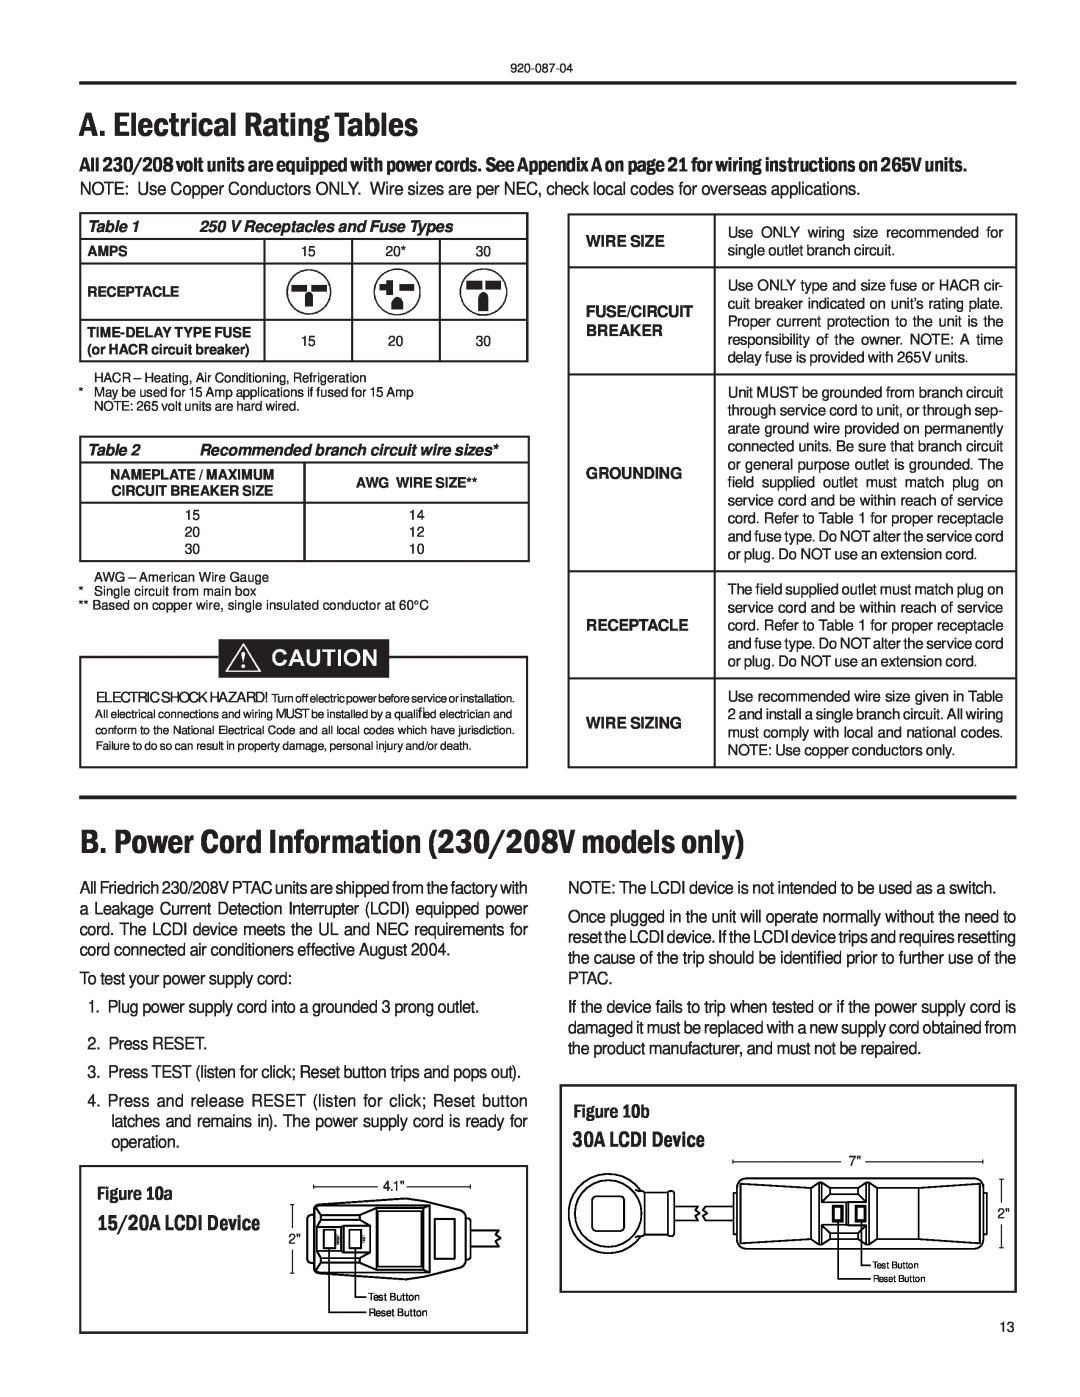 Friedrich HEAT PUMPS manual A. Electrical Rating Tables, B. Power Cord Information 230/208V models only, 15/20A LCDI Device 